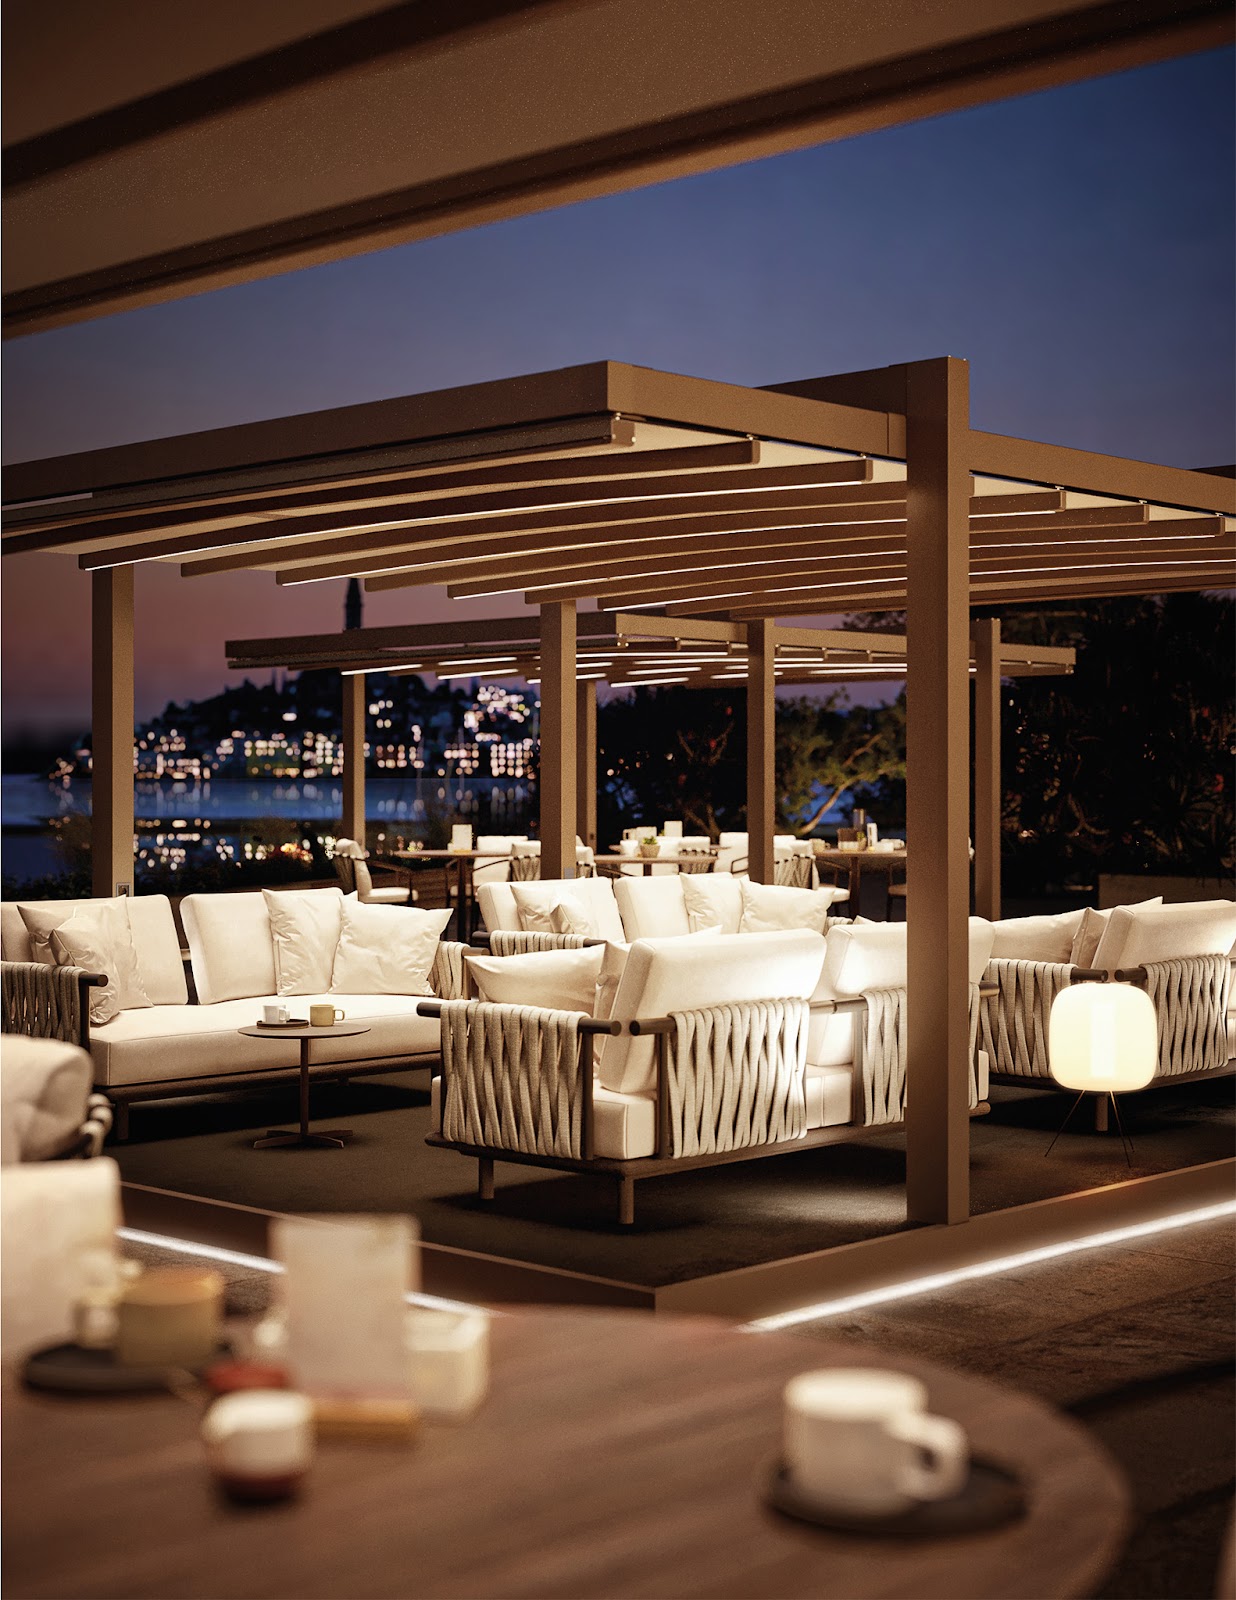 Free standing awnings over patio furniture at night